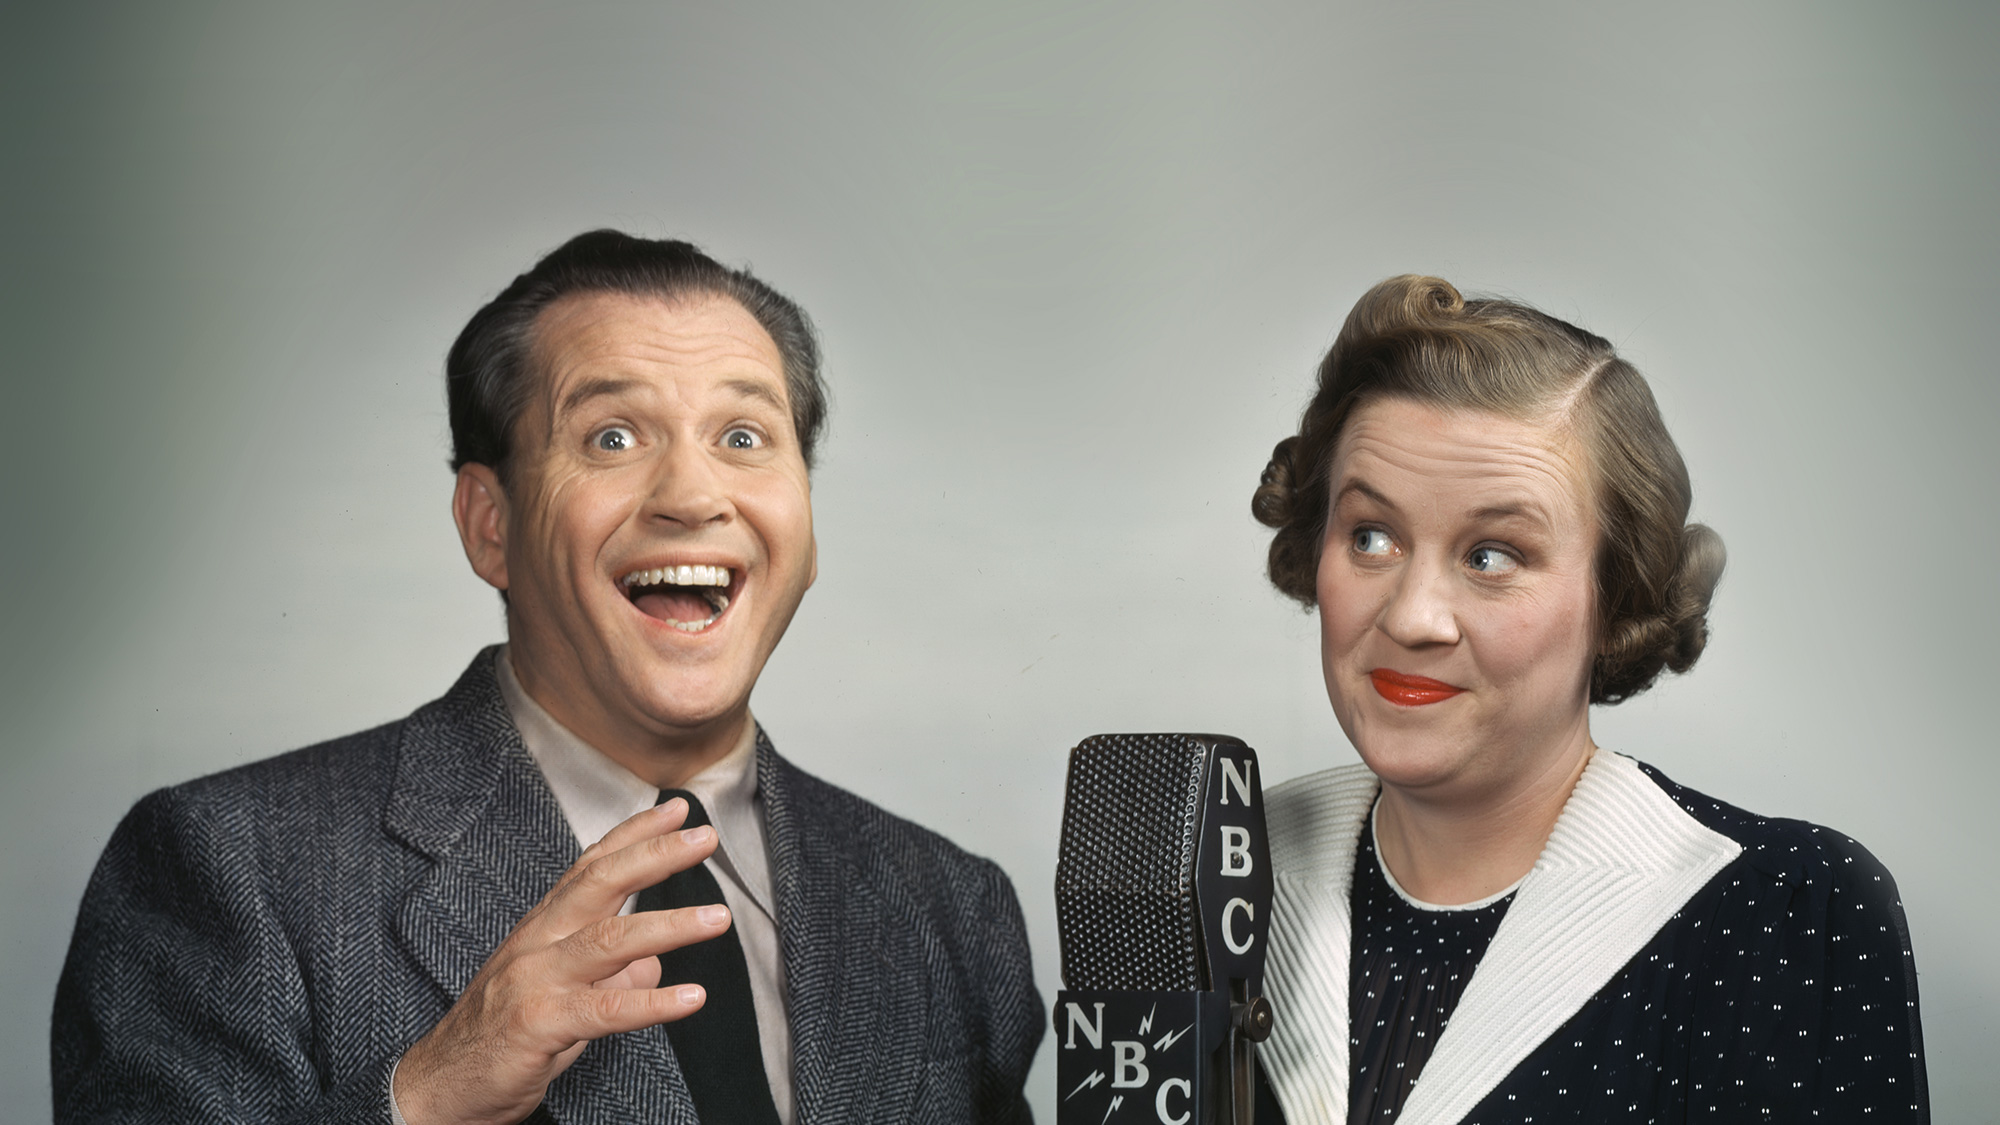 Fibber McGee and Molly McGee, the classic radio comedy duo of “Fibber McGee and Molly”.